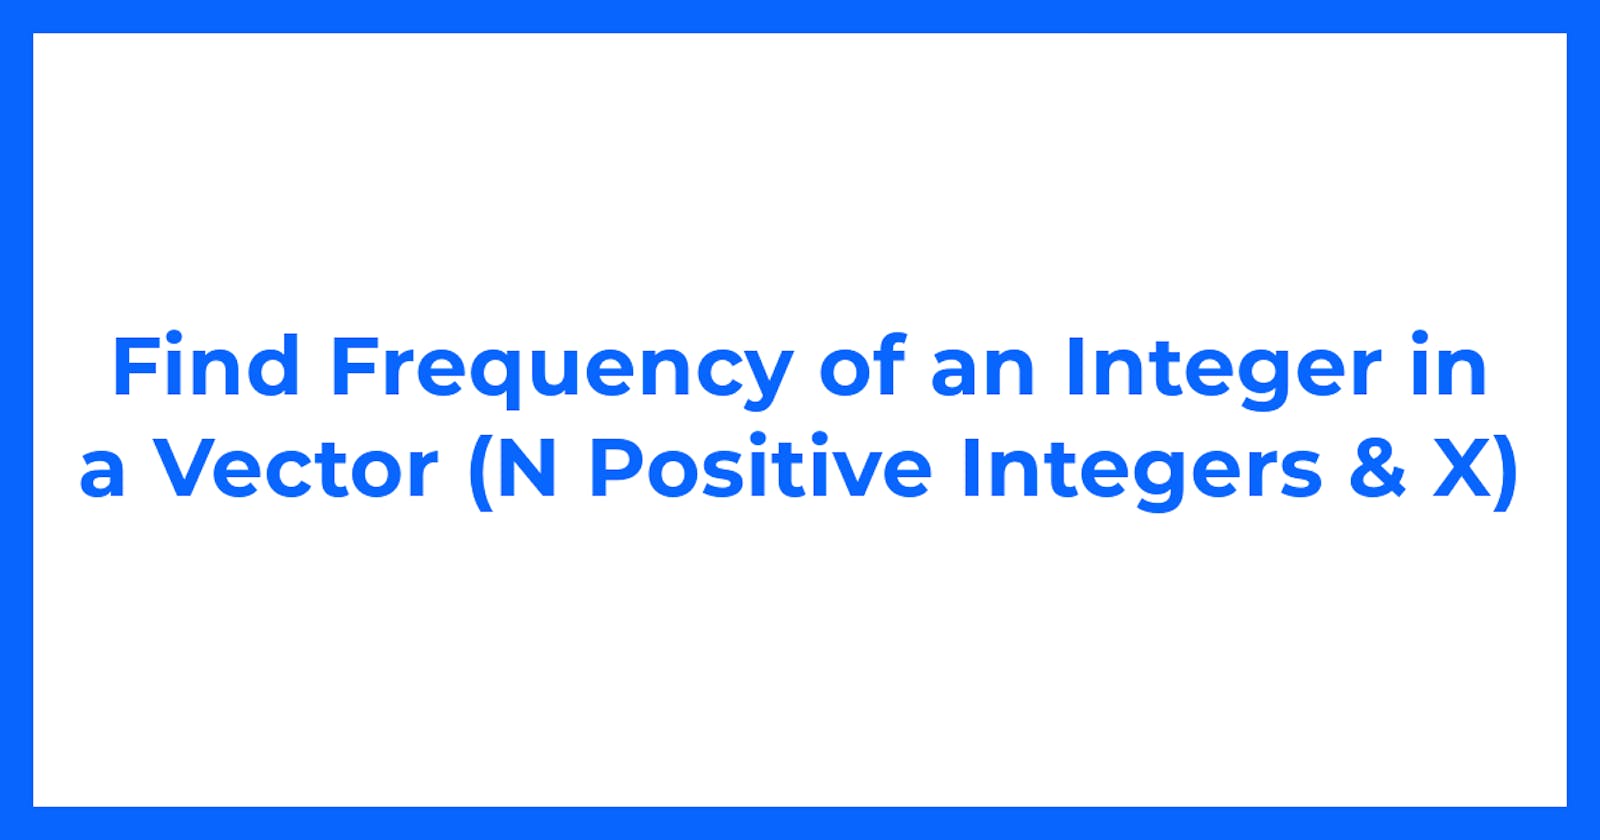 Find Frequency of an Integer in a Vector (N Positive Integers & X)